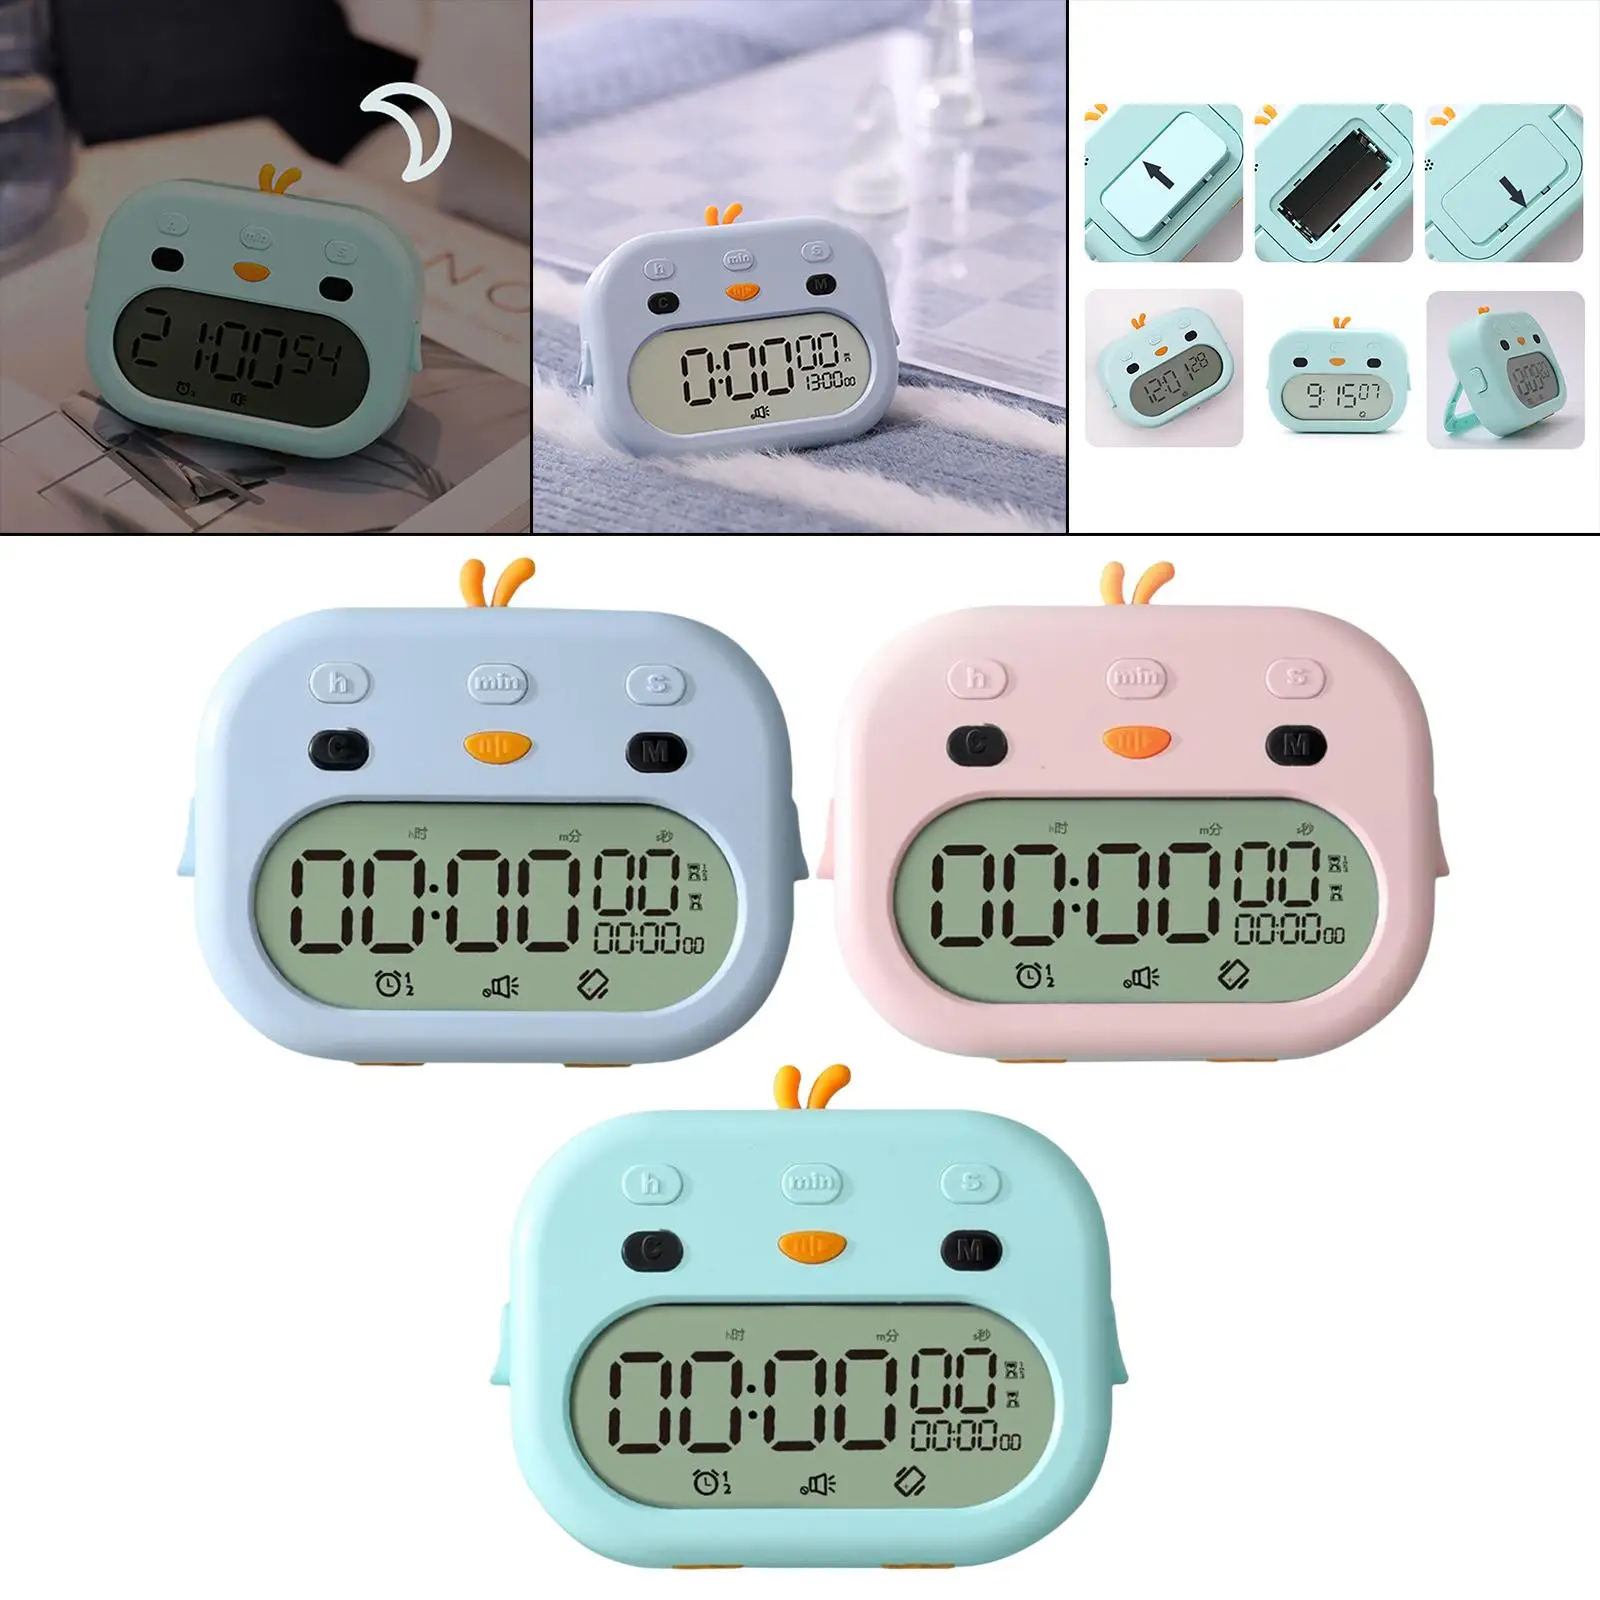 Digital Alarm Clock with Stand Cute Dual Alarm Portable for Homework Kids Teachers Classroom Time Cooking Study Exercise Baking